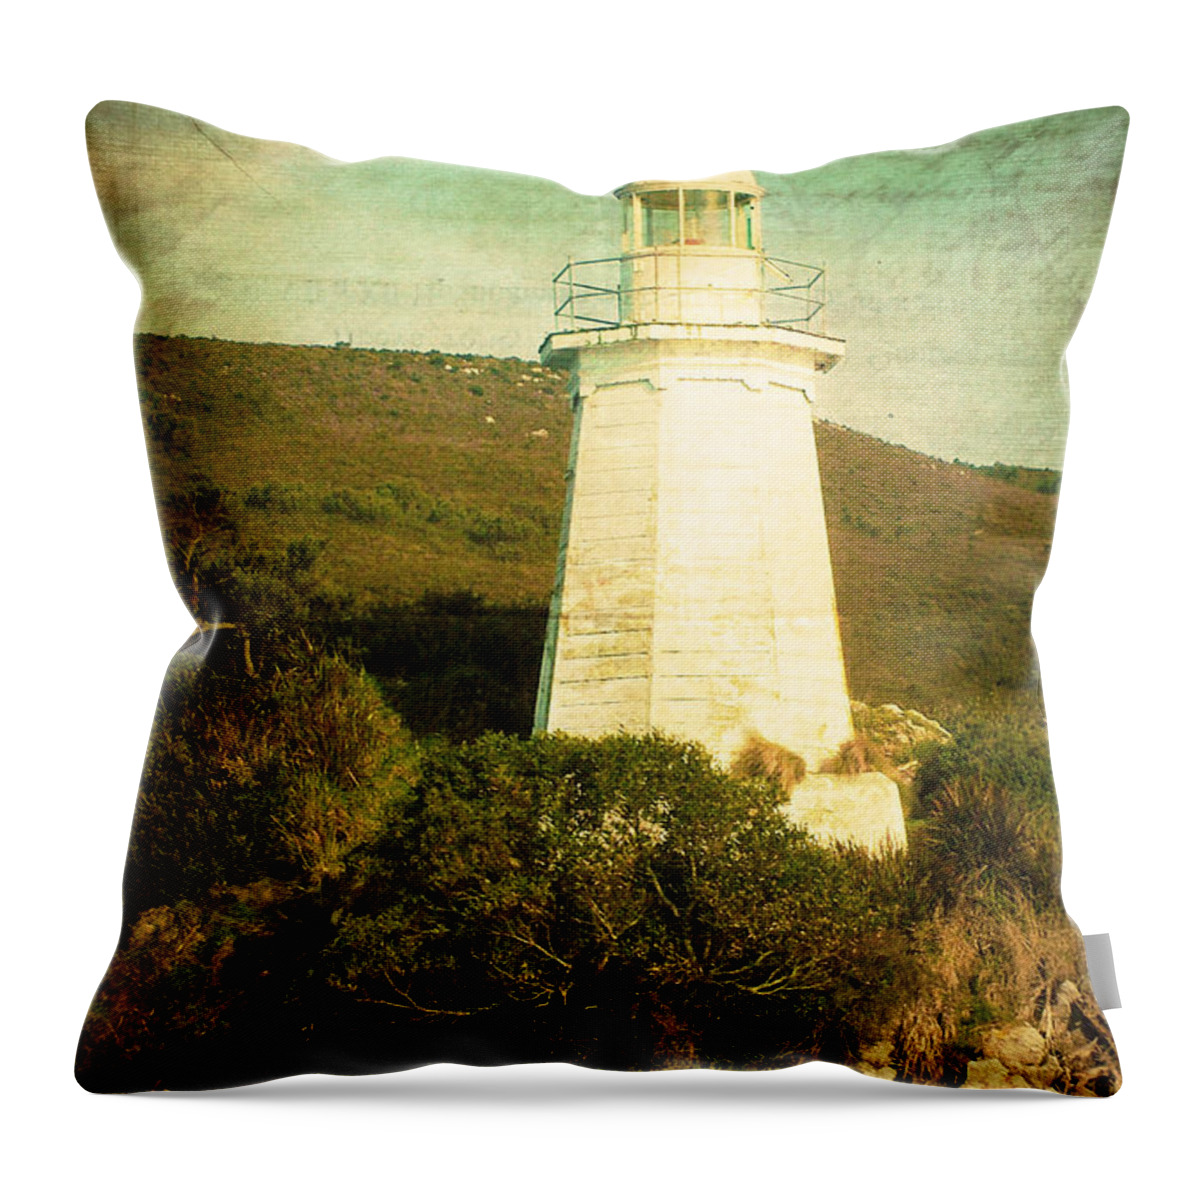 Vintage Throw Pillow featuring the photograph The Old Lighthouse by Phill Petrovic